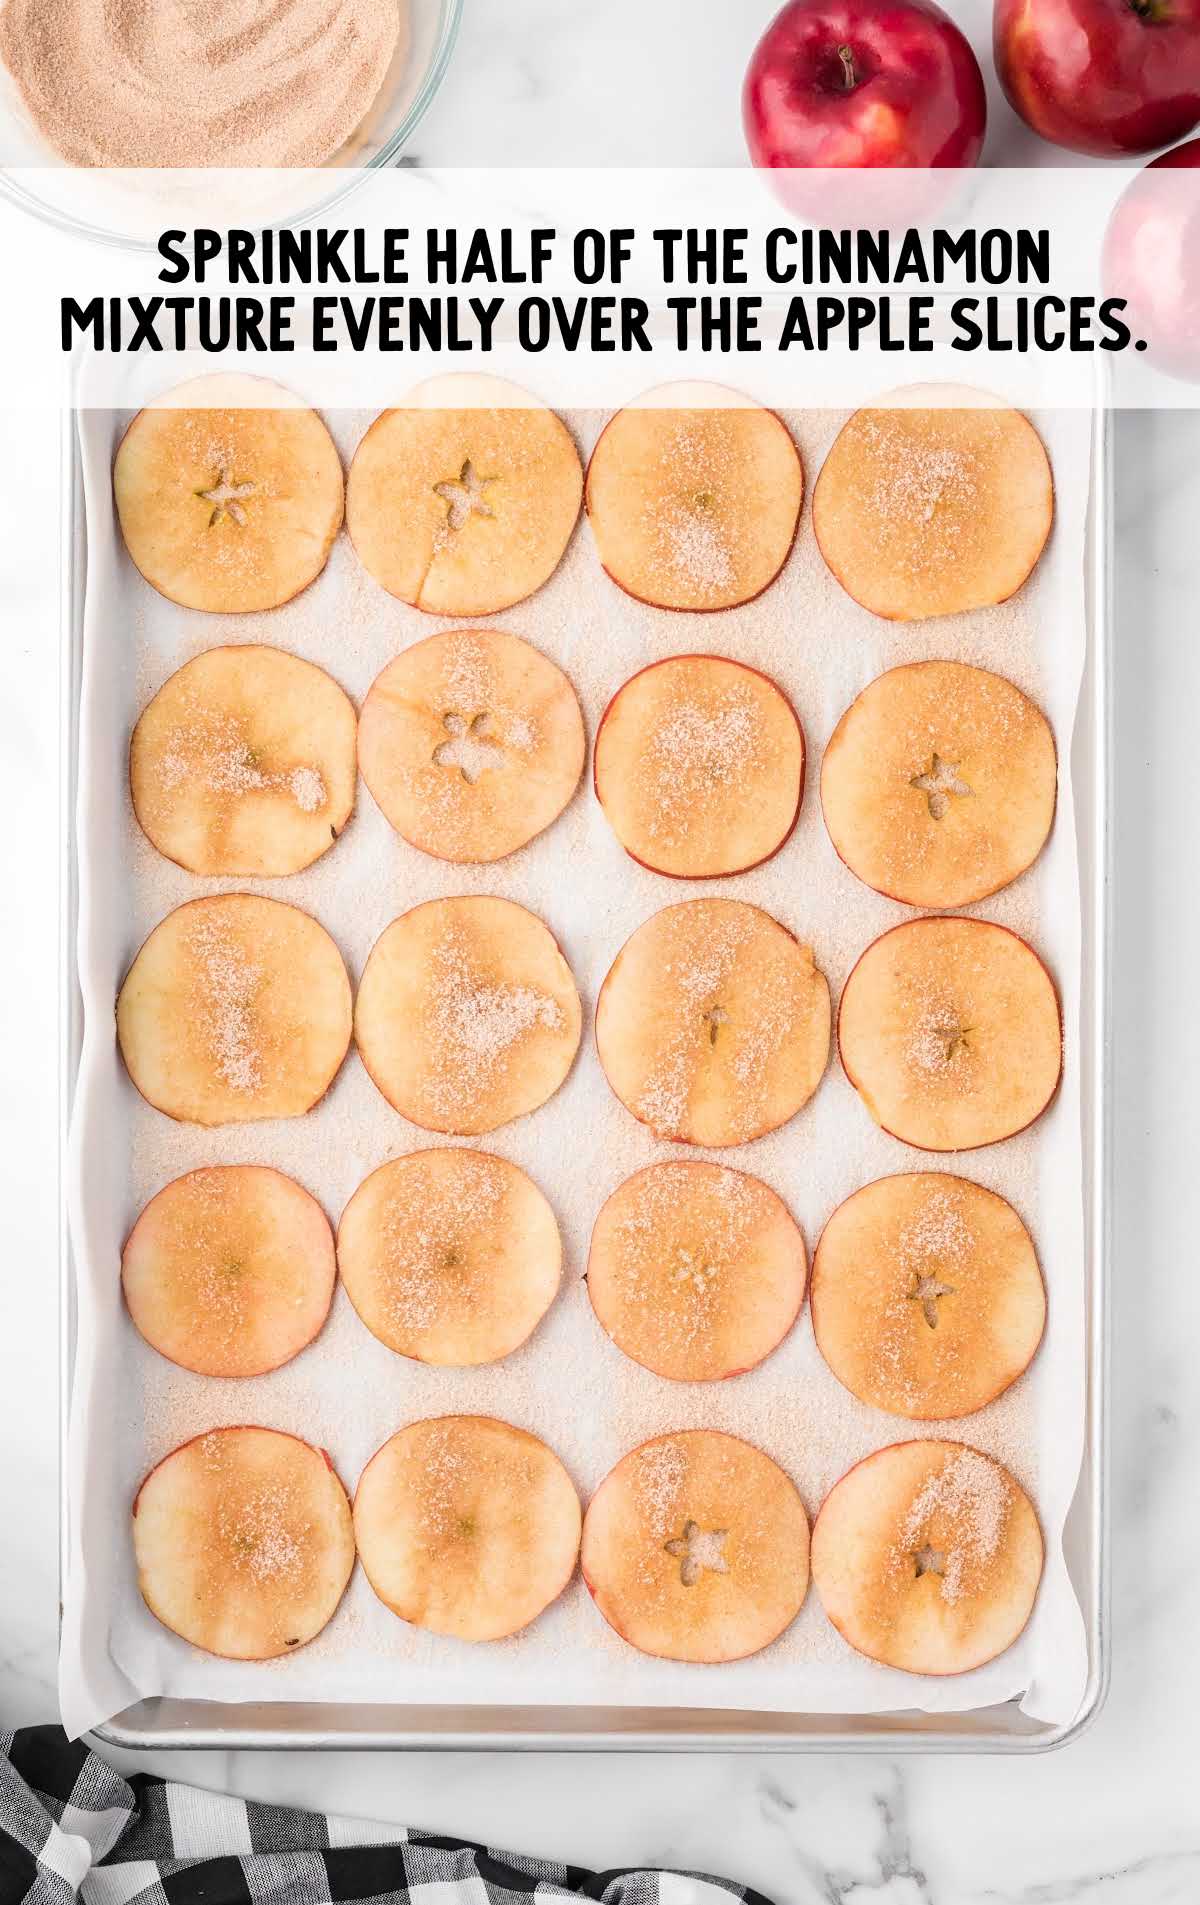 cinnamon mixture sprinkled over the apple slices on a baking sheet